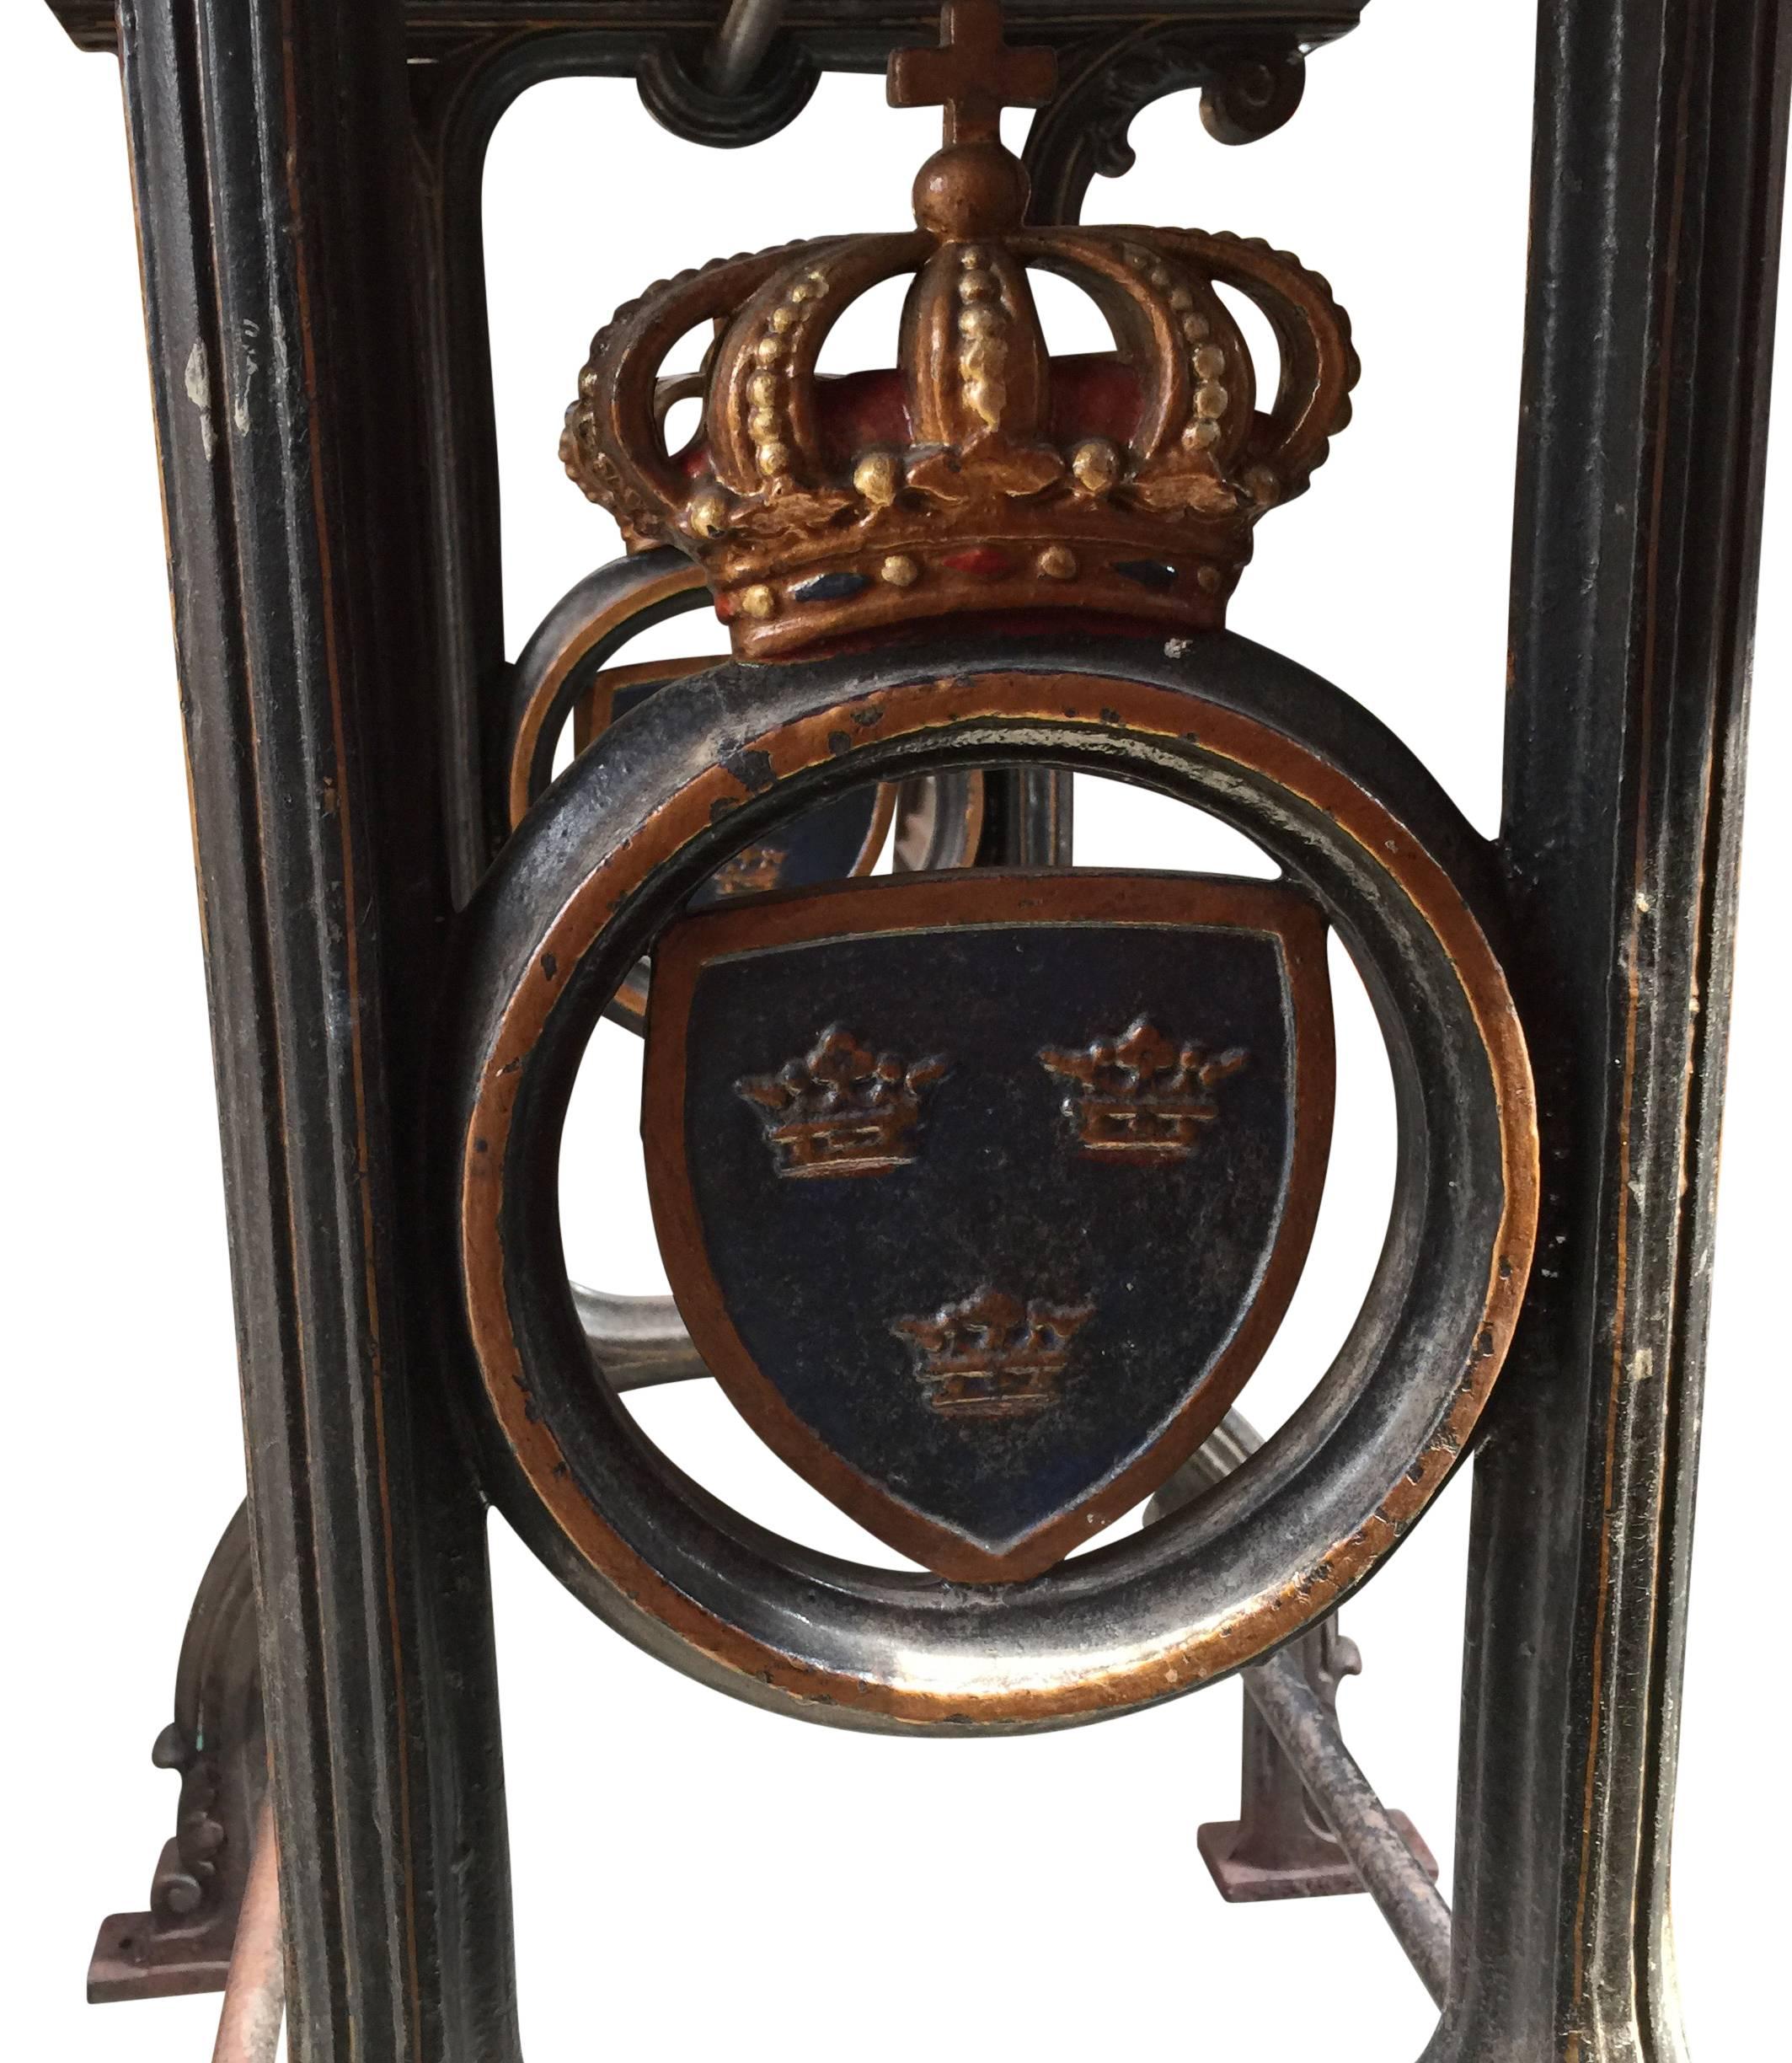 Charming iron cast table, with a crowned emblem with three royal Swedish crowns on blue background on each side.